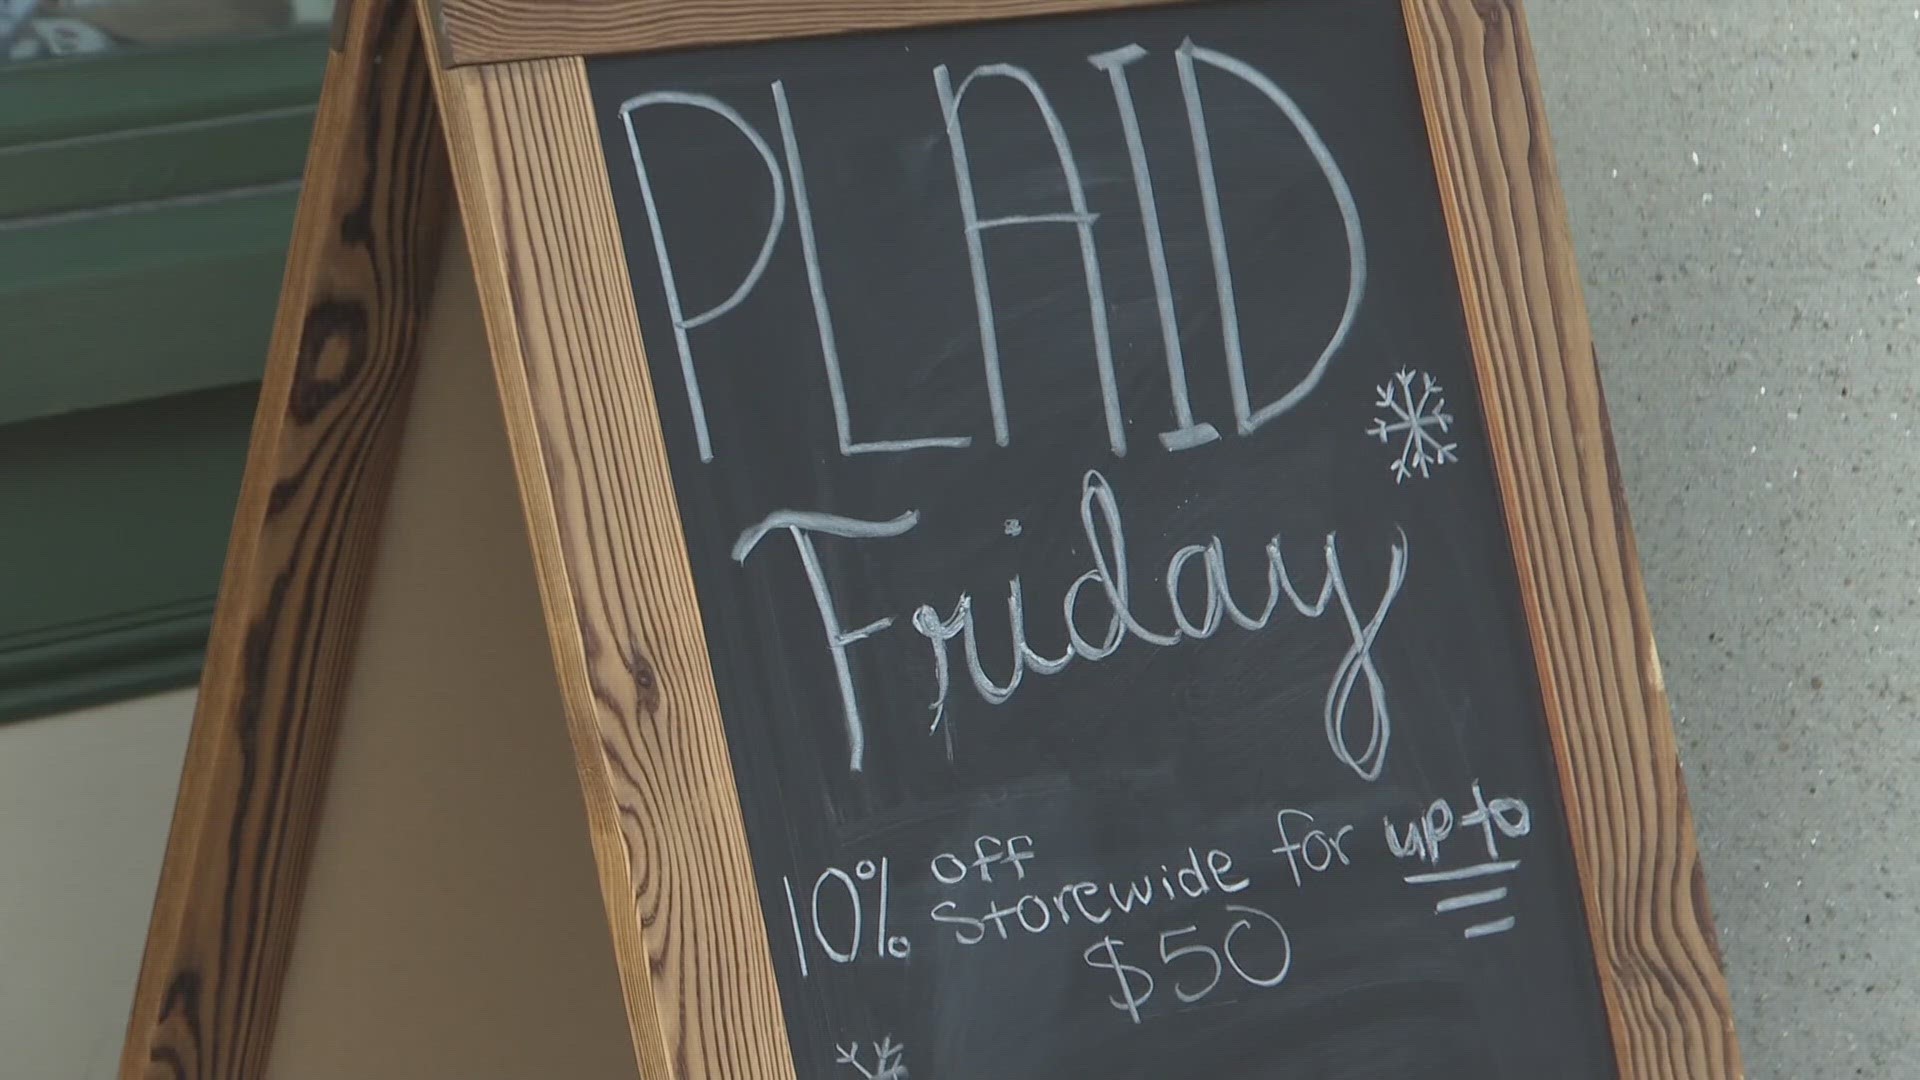 Mainers are encouraged to shop local once again this year.